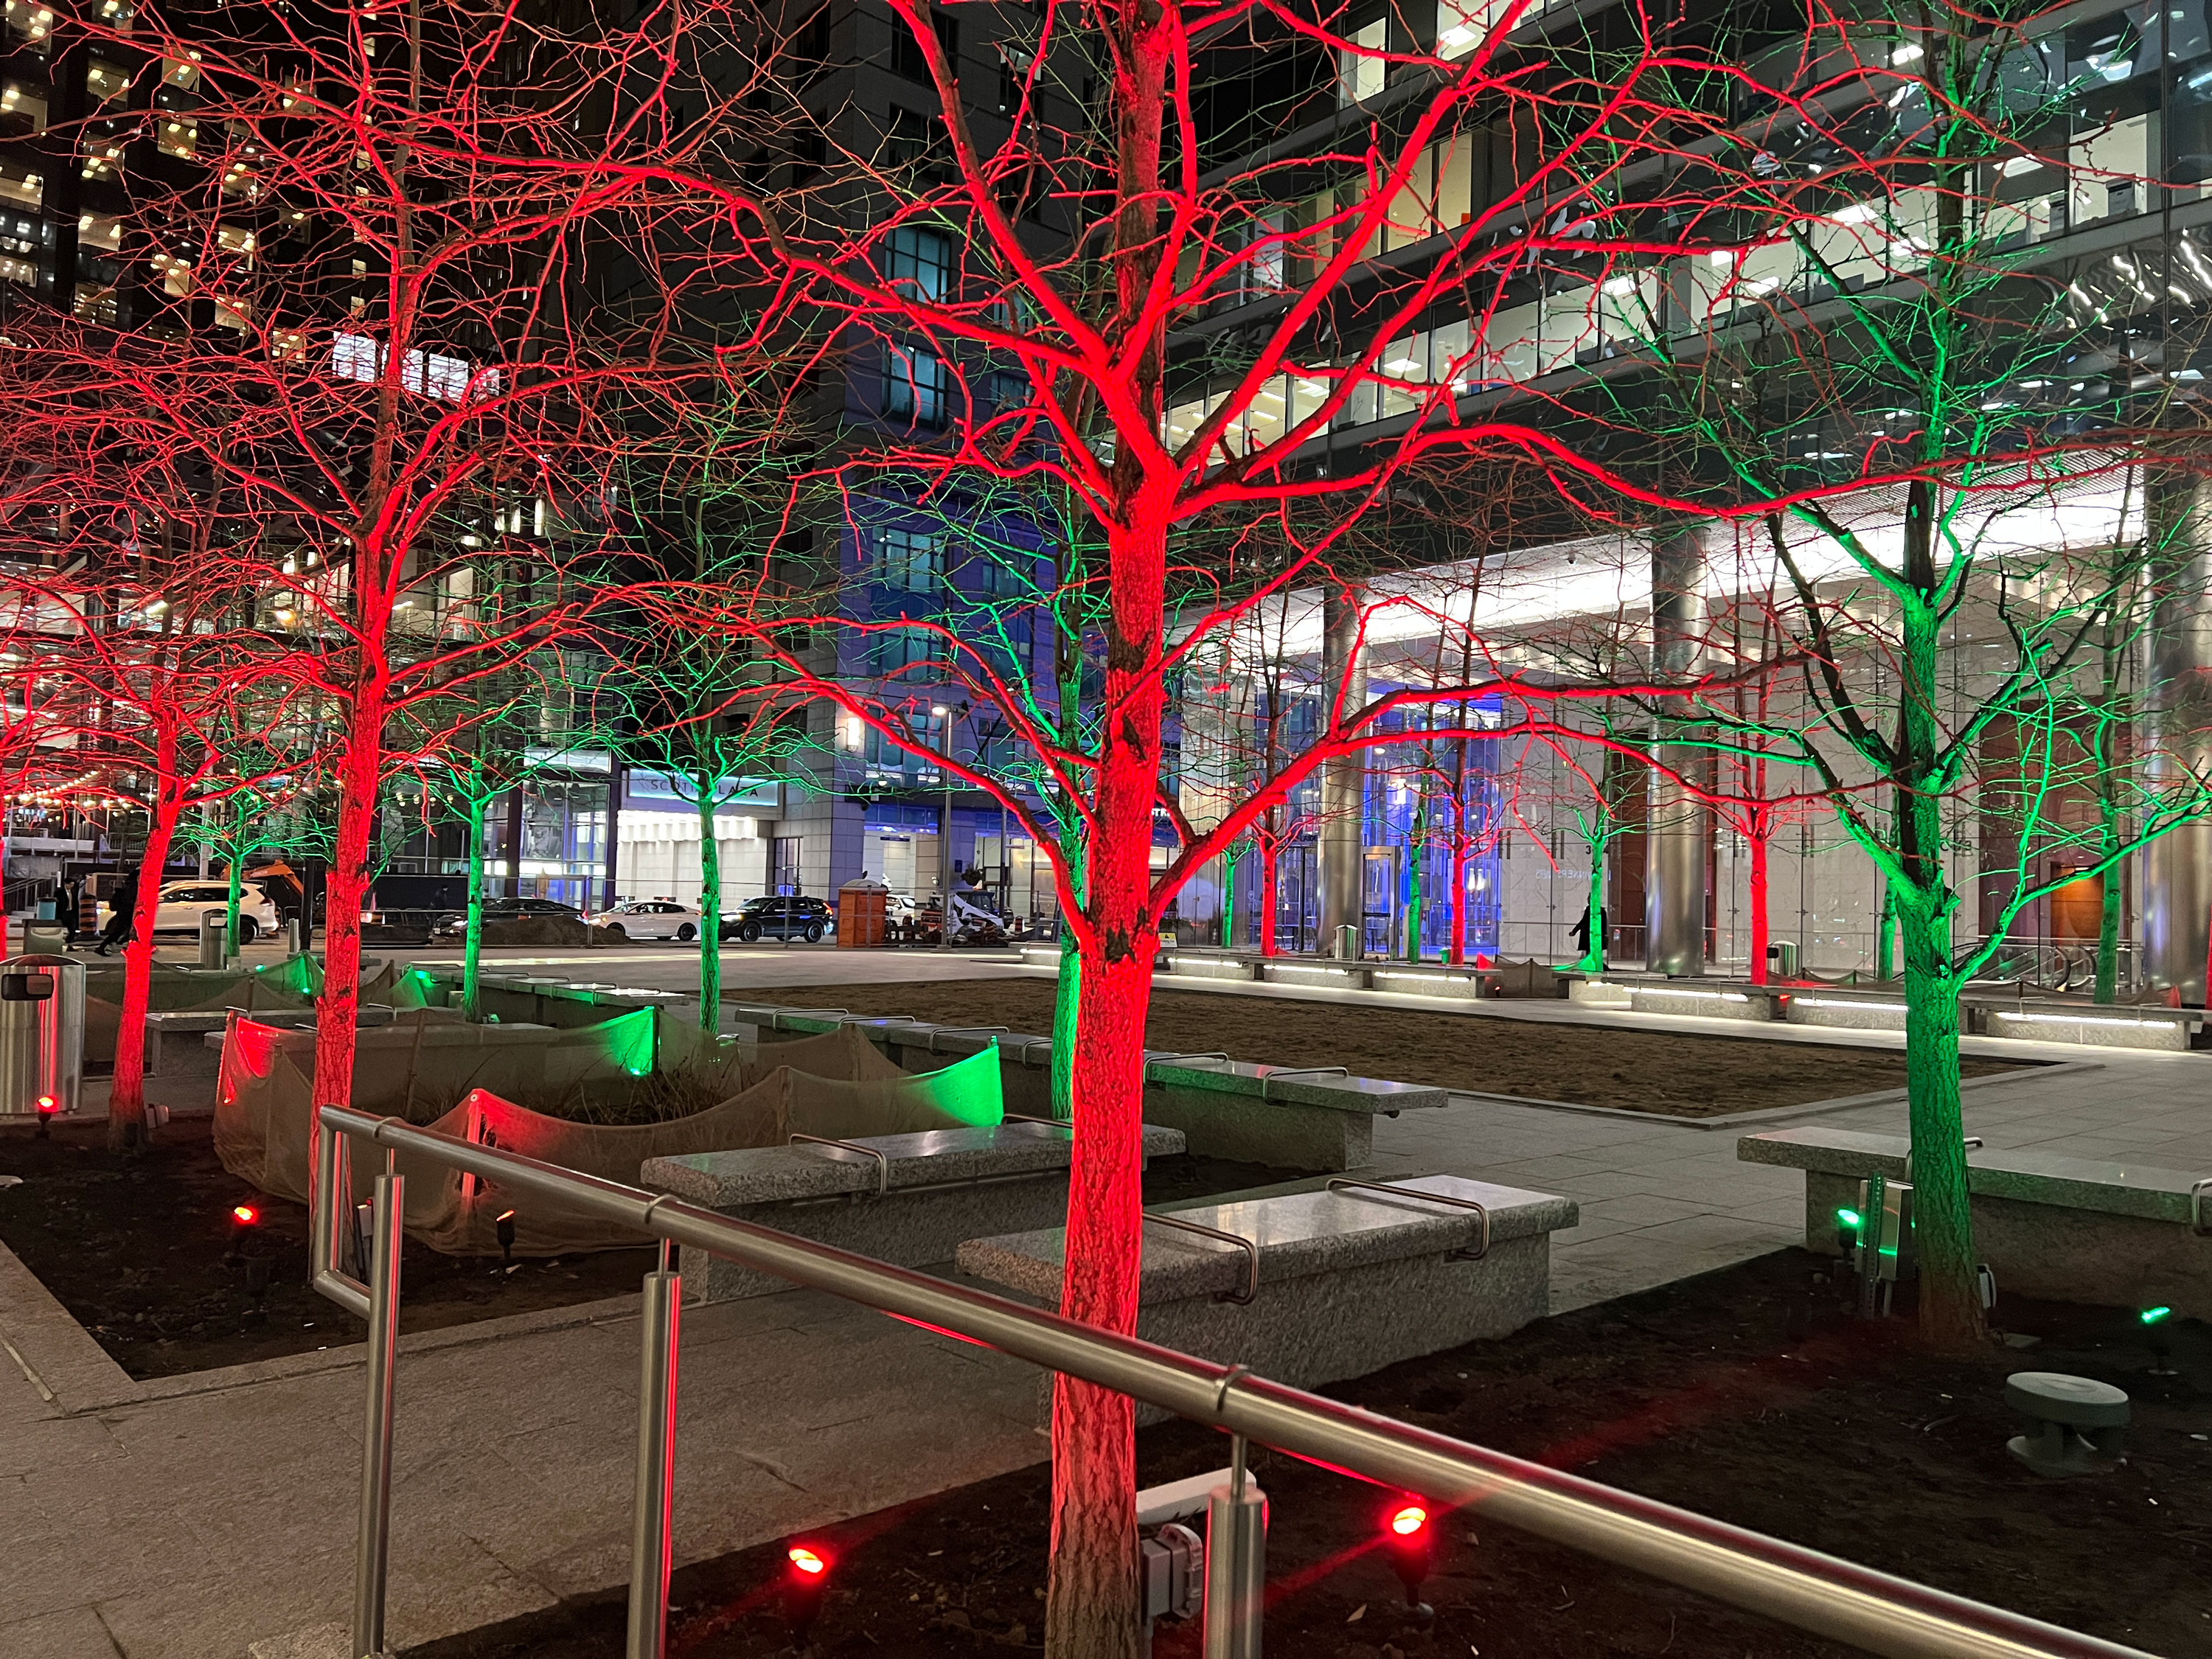 central area with trees lit up green and red